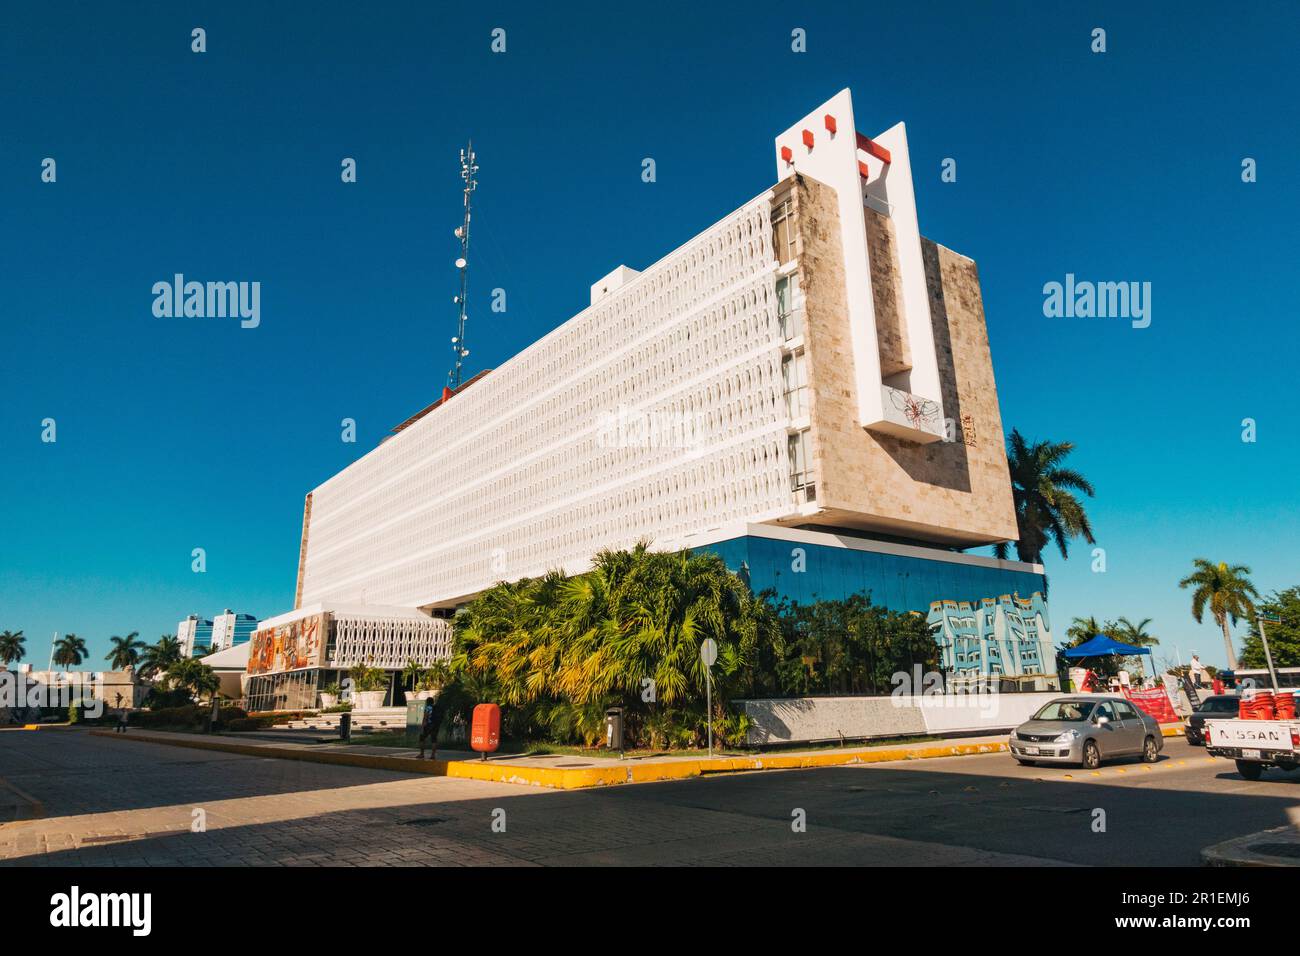 the 1970s styled Mexican State of Campeche government offices in the capital city, Mexico Stock Photo